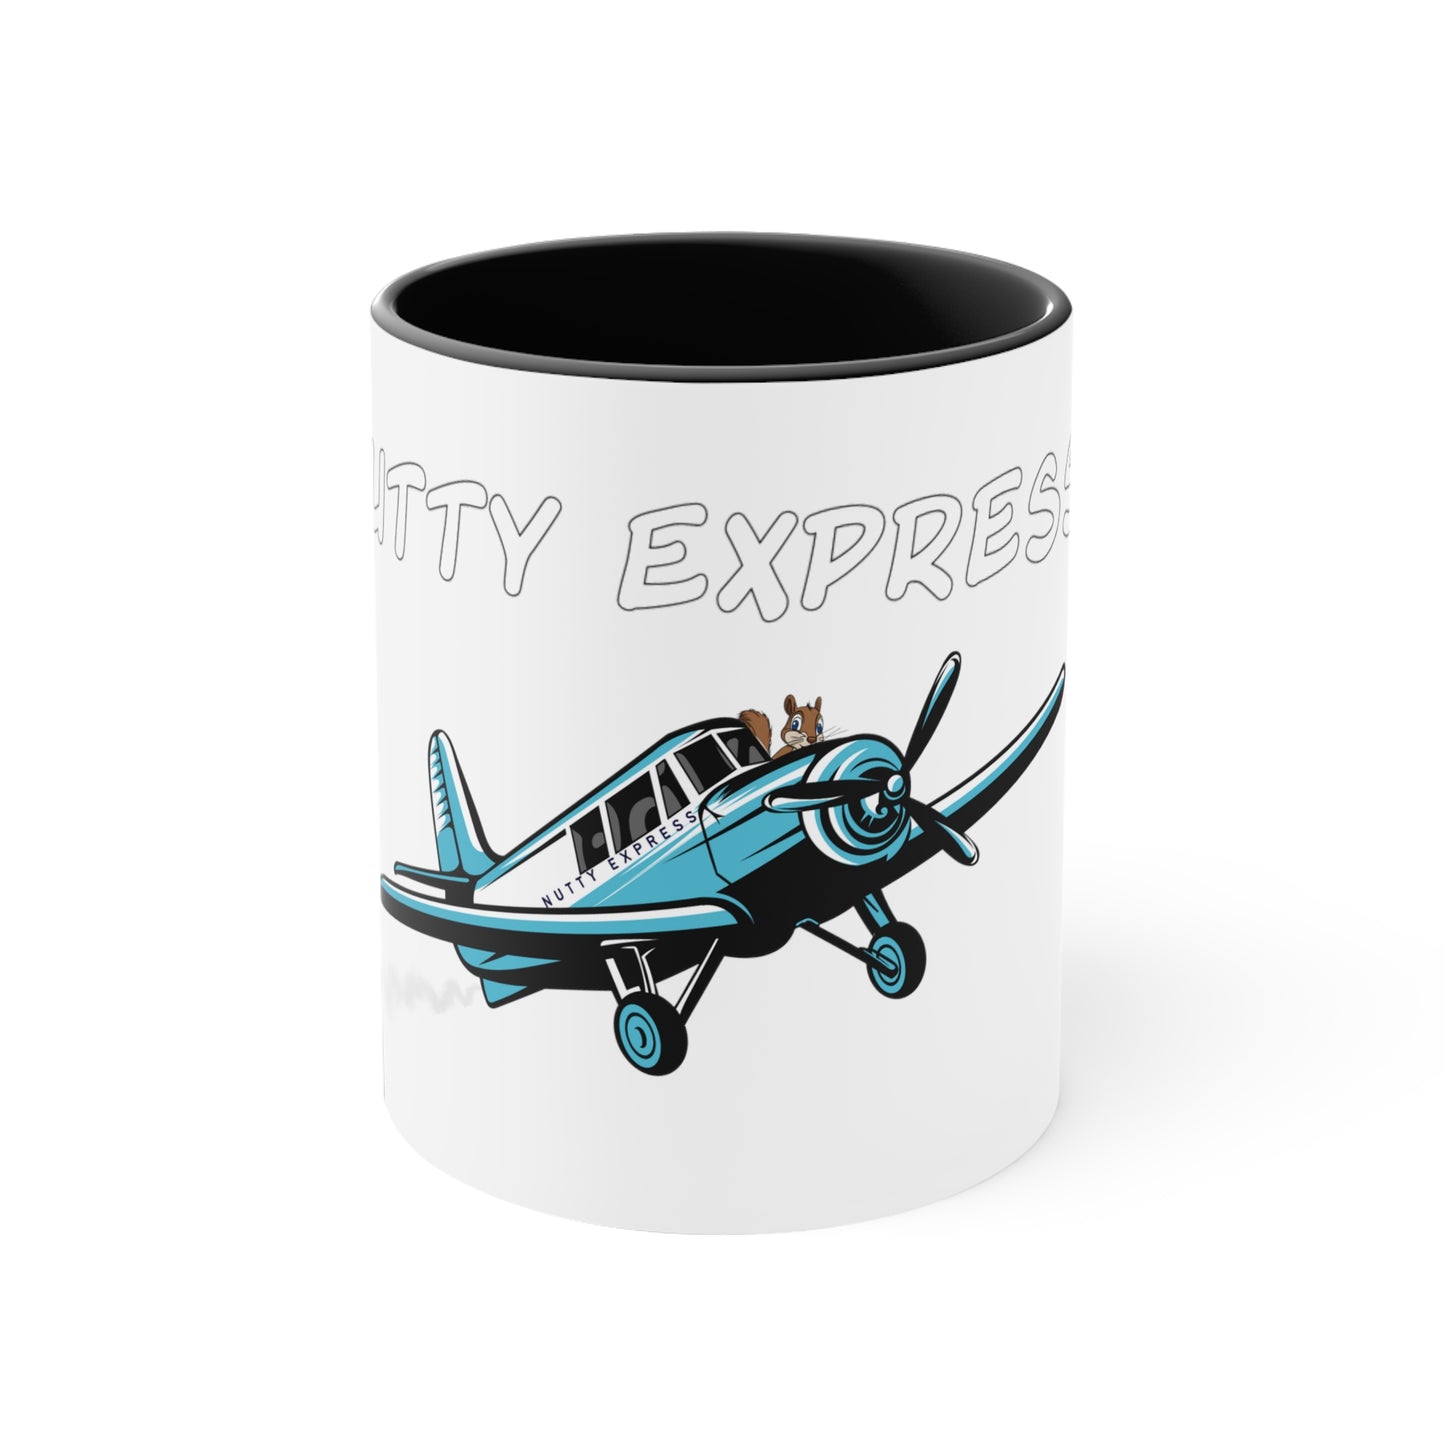 Nutty's Express Delivery. Always On-Time. Time Coffee Mug, 11oz